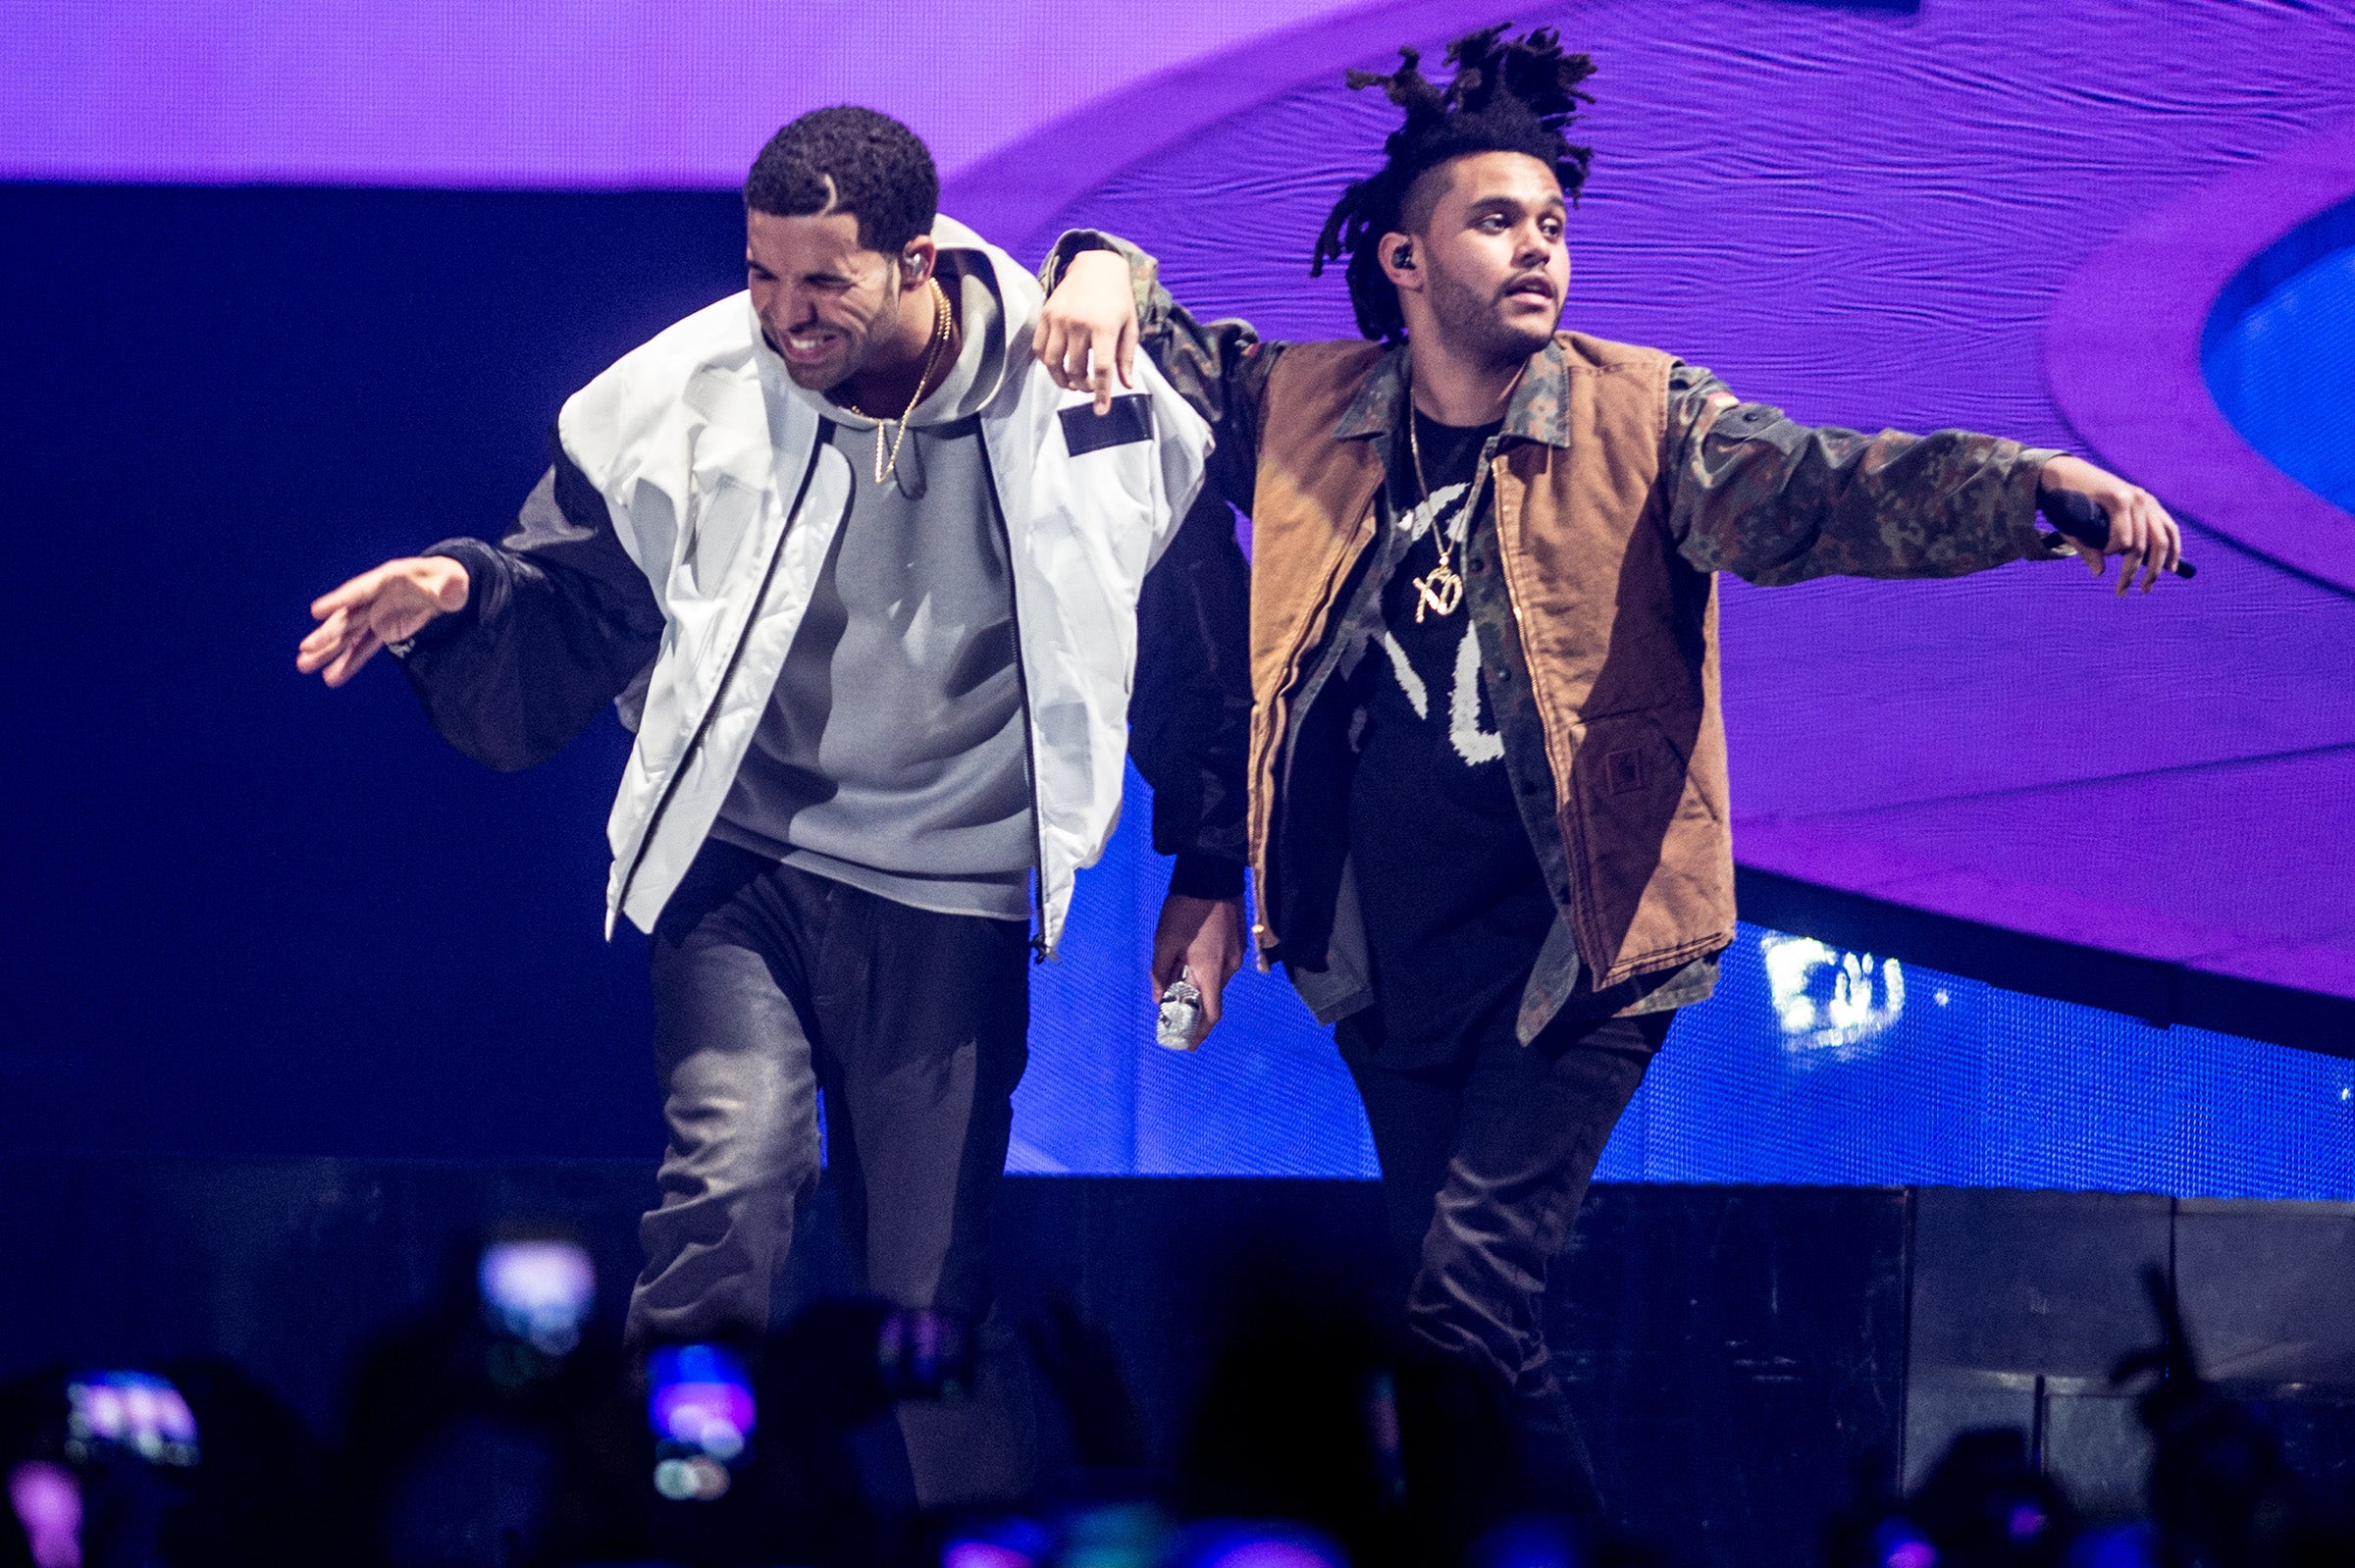 Featured image for AI created a song mimicking the work of Drake and The Weeknd. What does that mean for copyright law? article